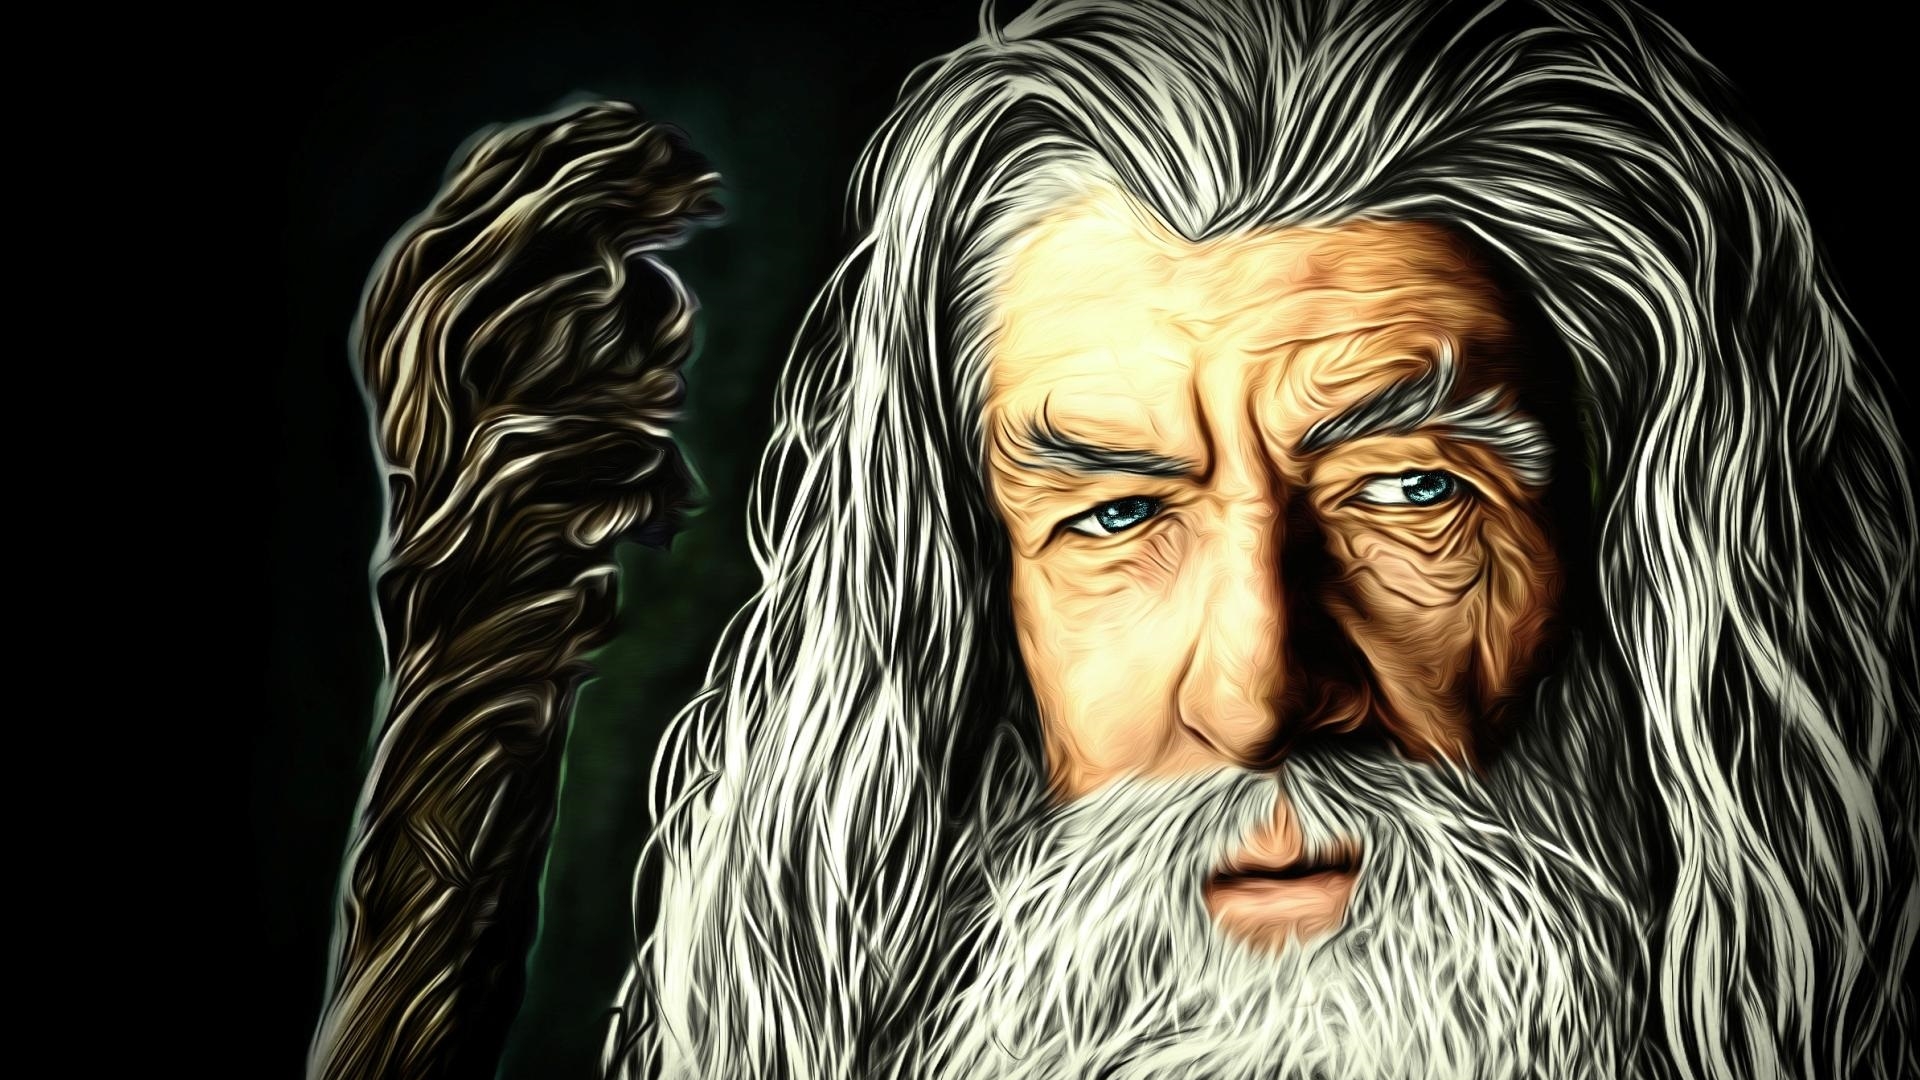 1920x1080 Resolution Gandalf The Lord of the Rings Artwork 1080P Laptop